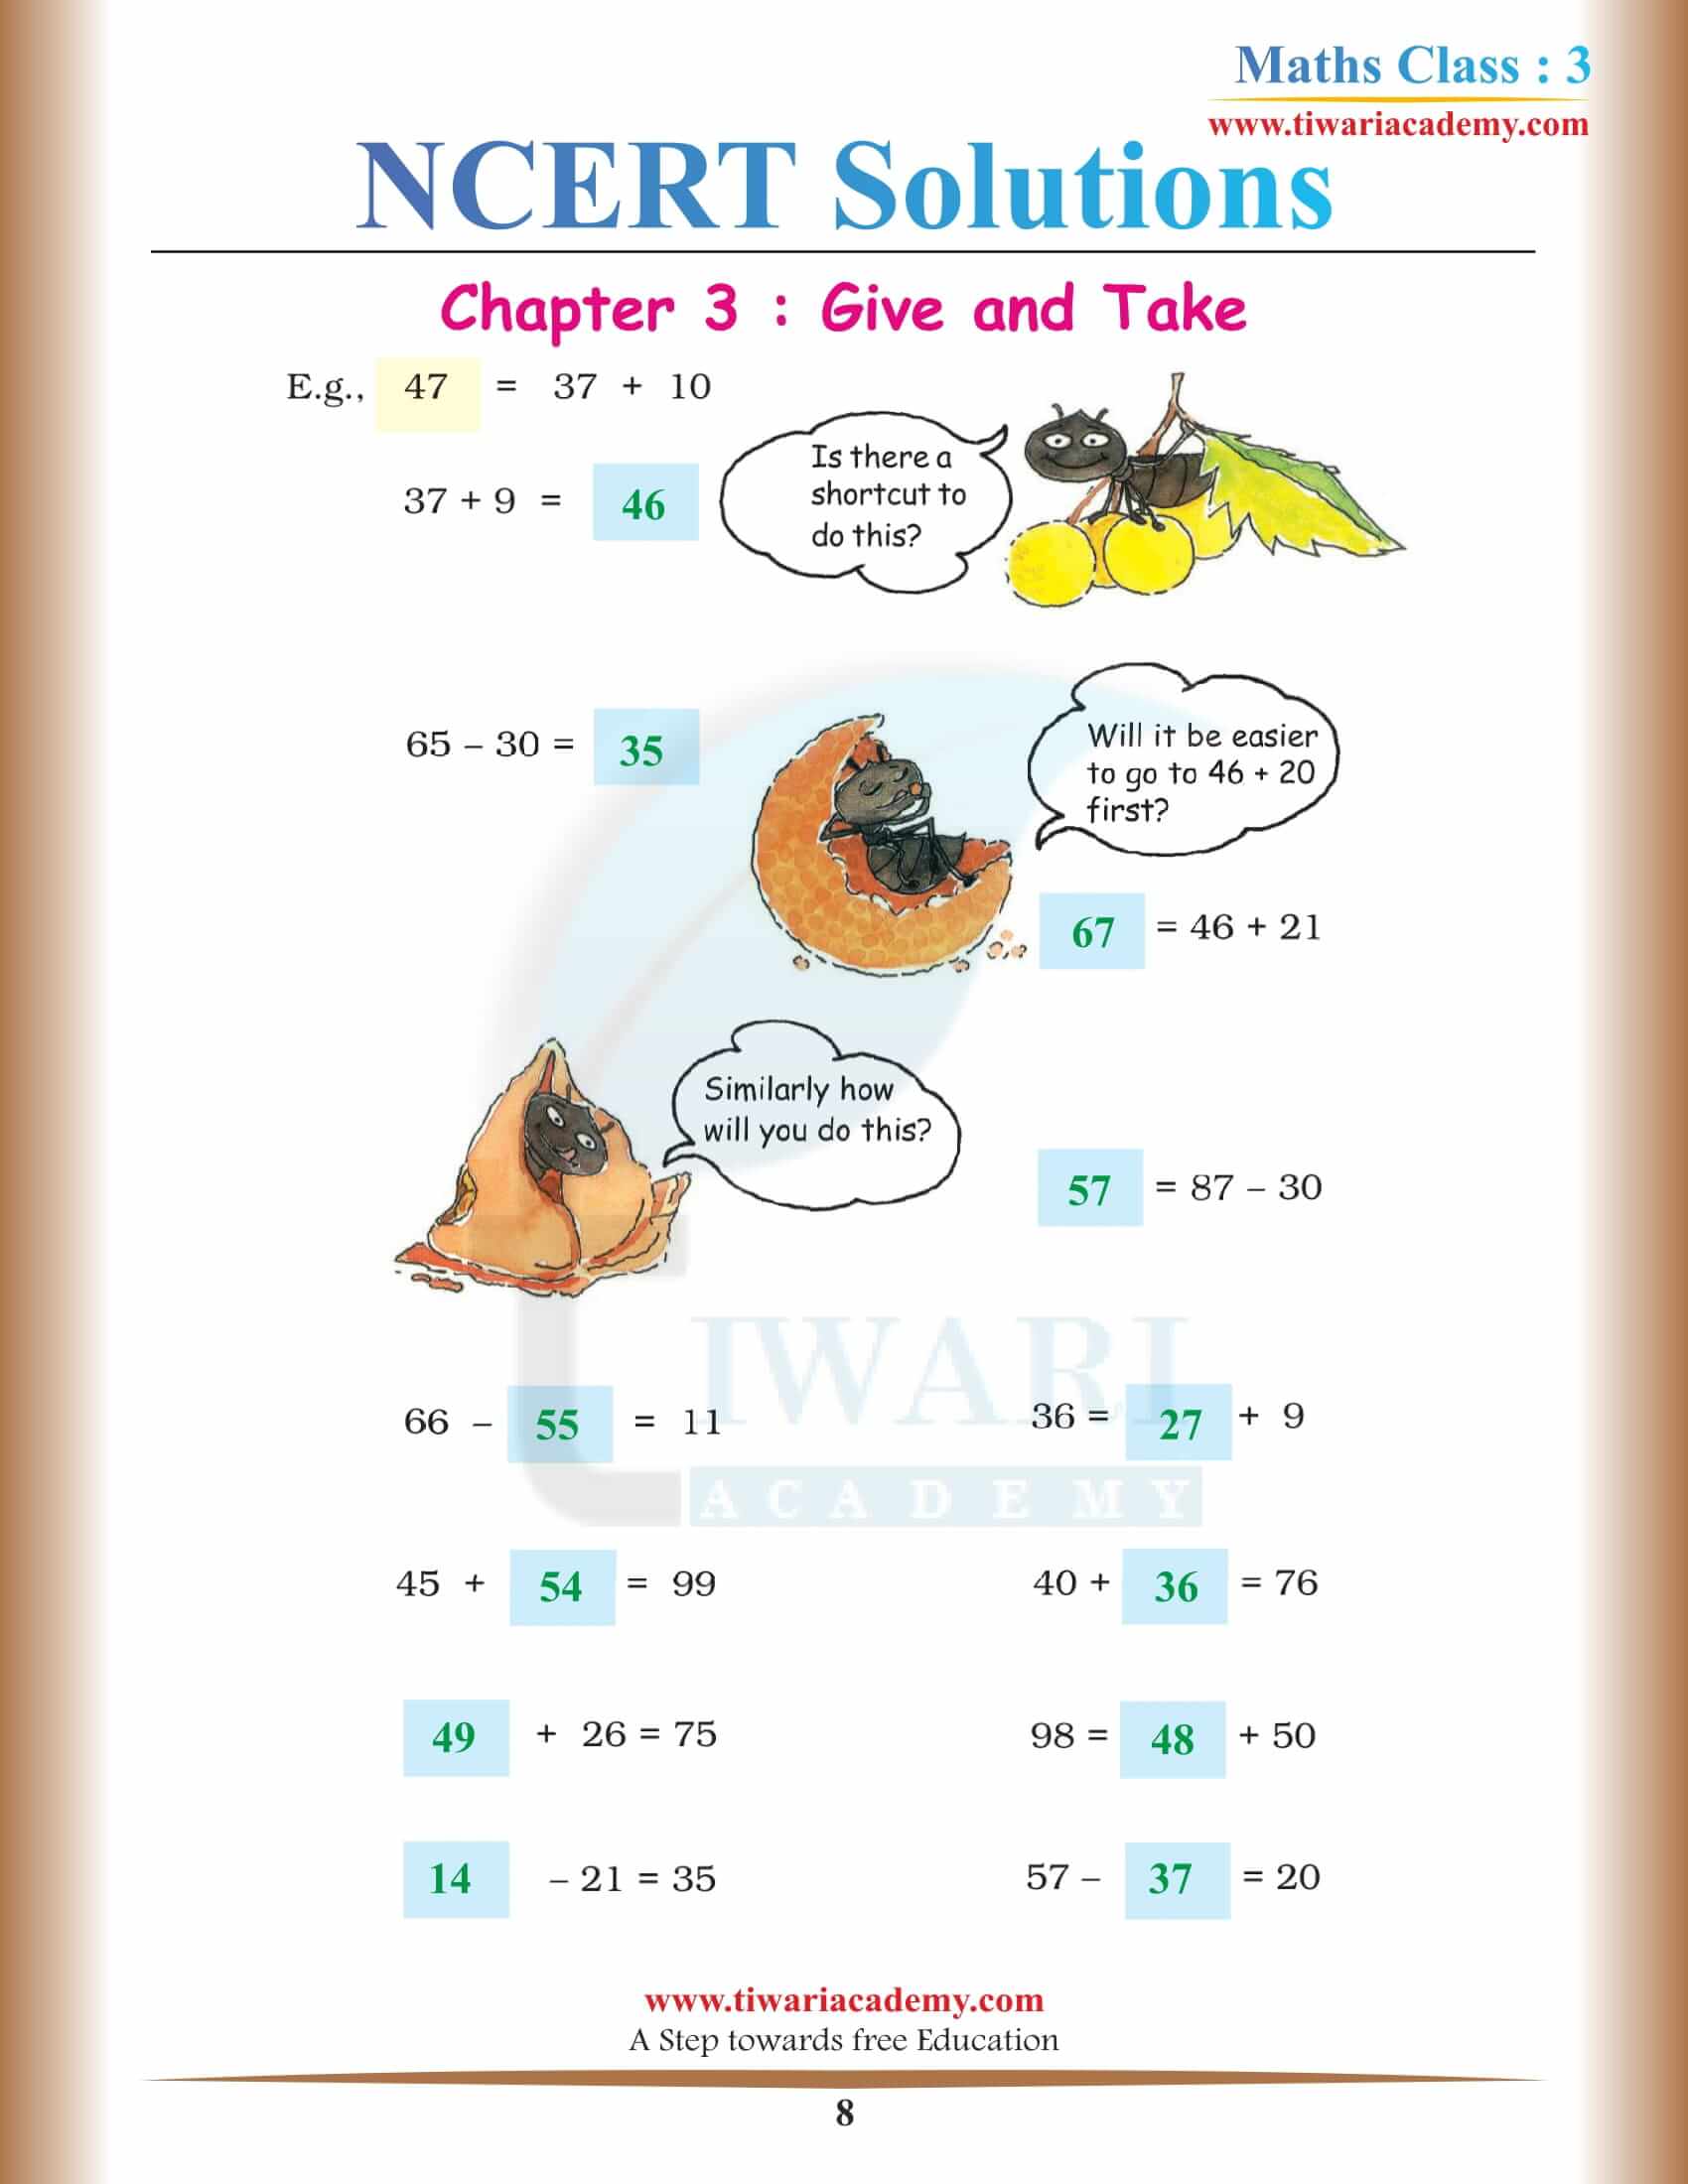 NCERT Solutions for Class 3 Maths Chapter 3 all questions sols